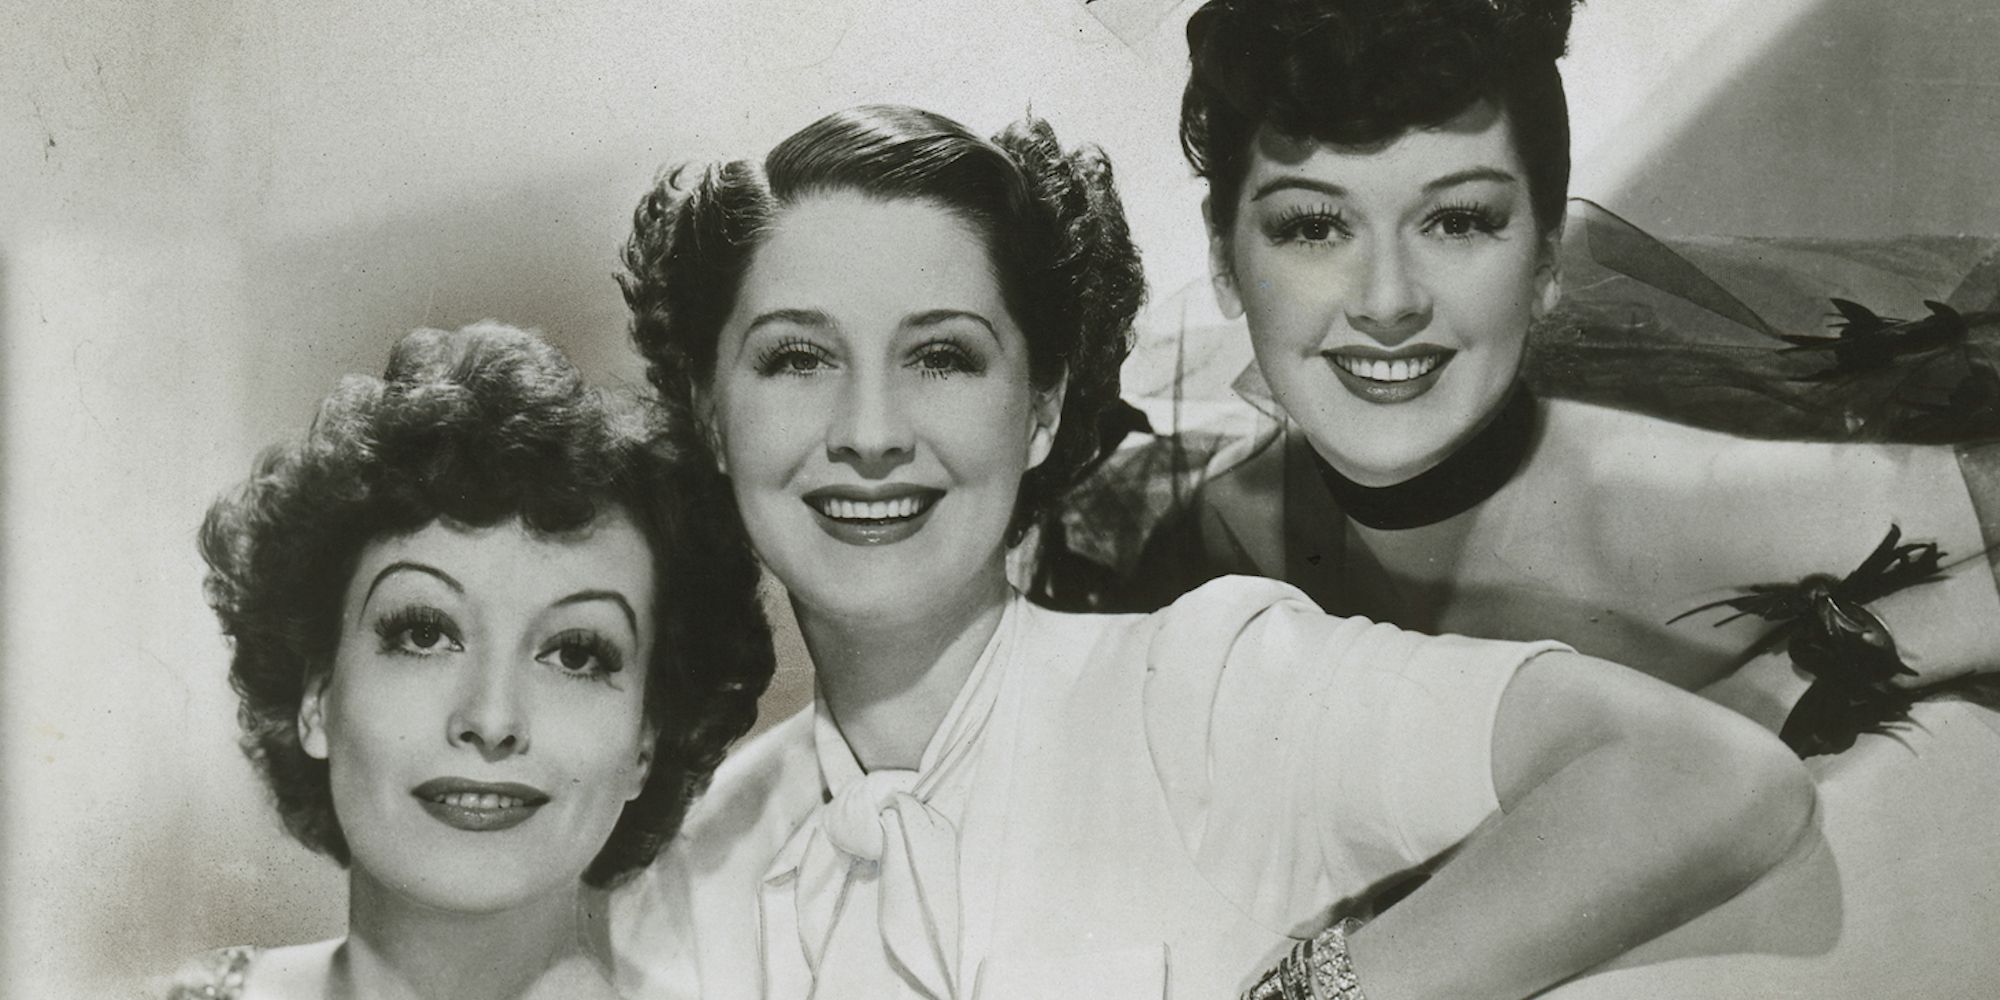 Joan Crawford, Norma Sheared, and Rosalind Russell in a promo image for The Women 1939